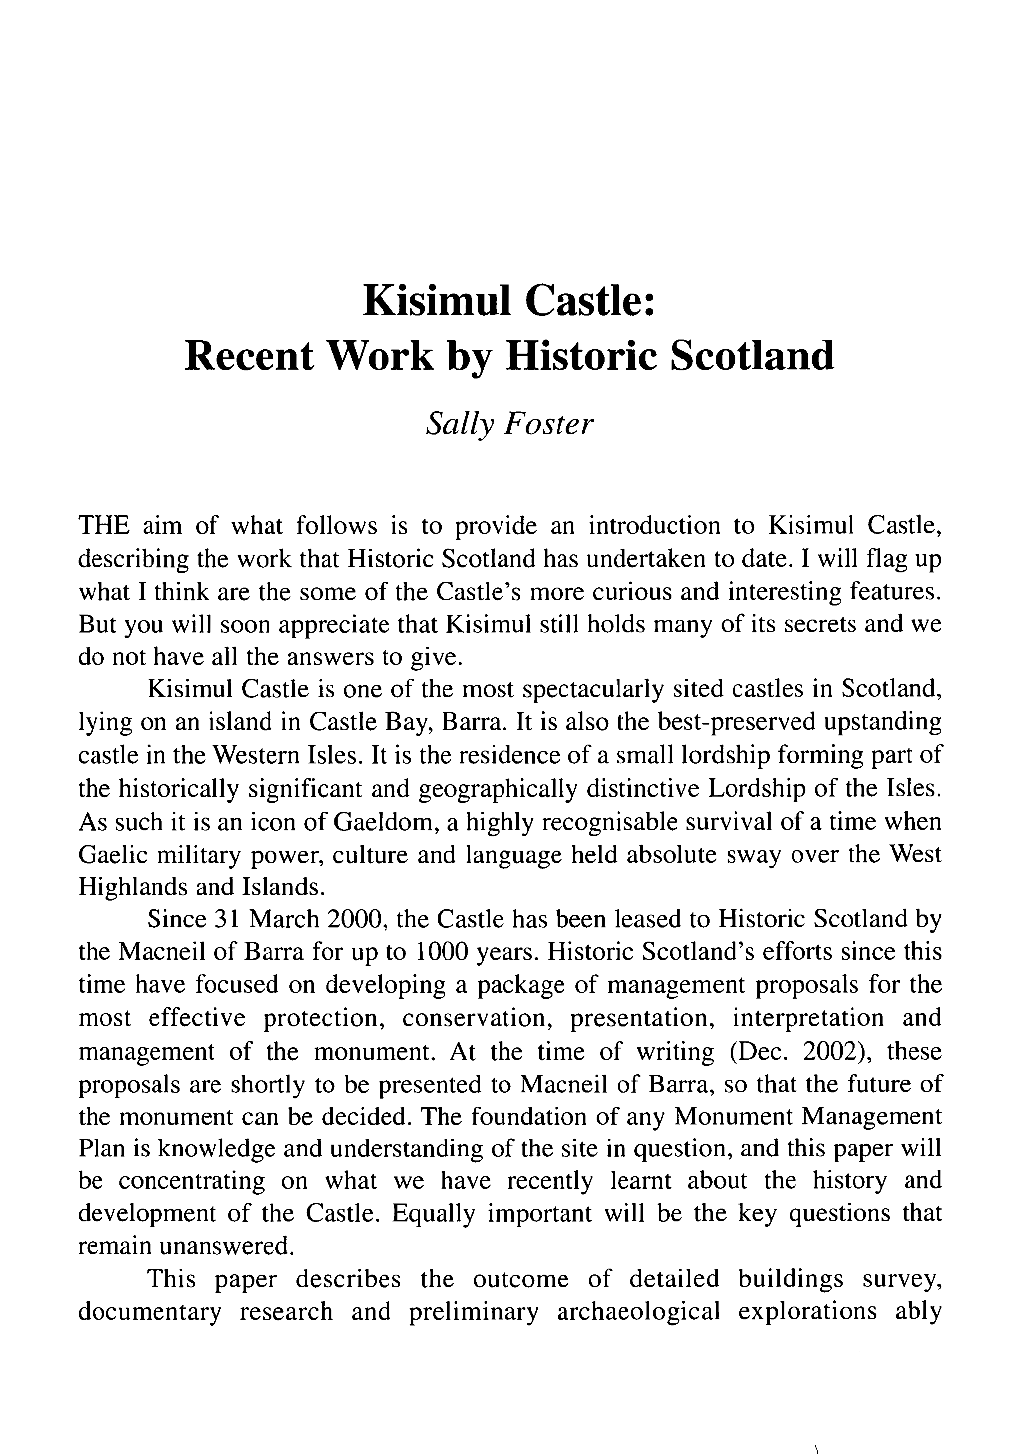 Kisimul Castle: Recent Work by Historic Scotland Sally Foster